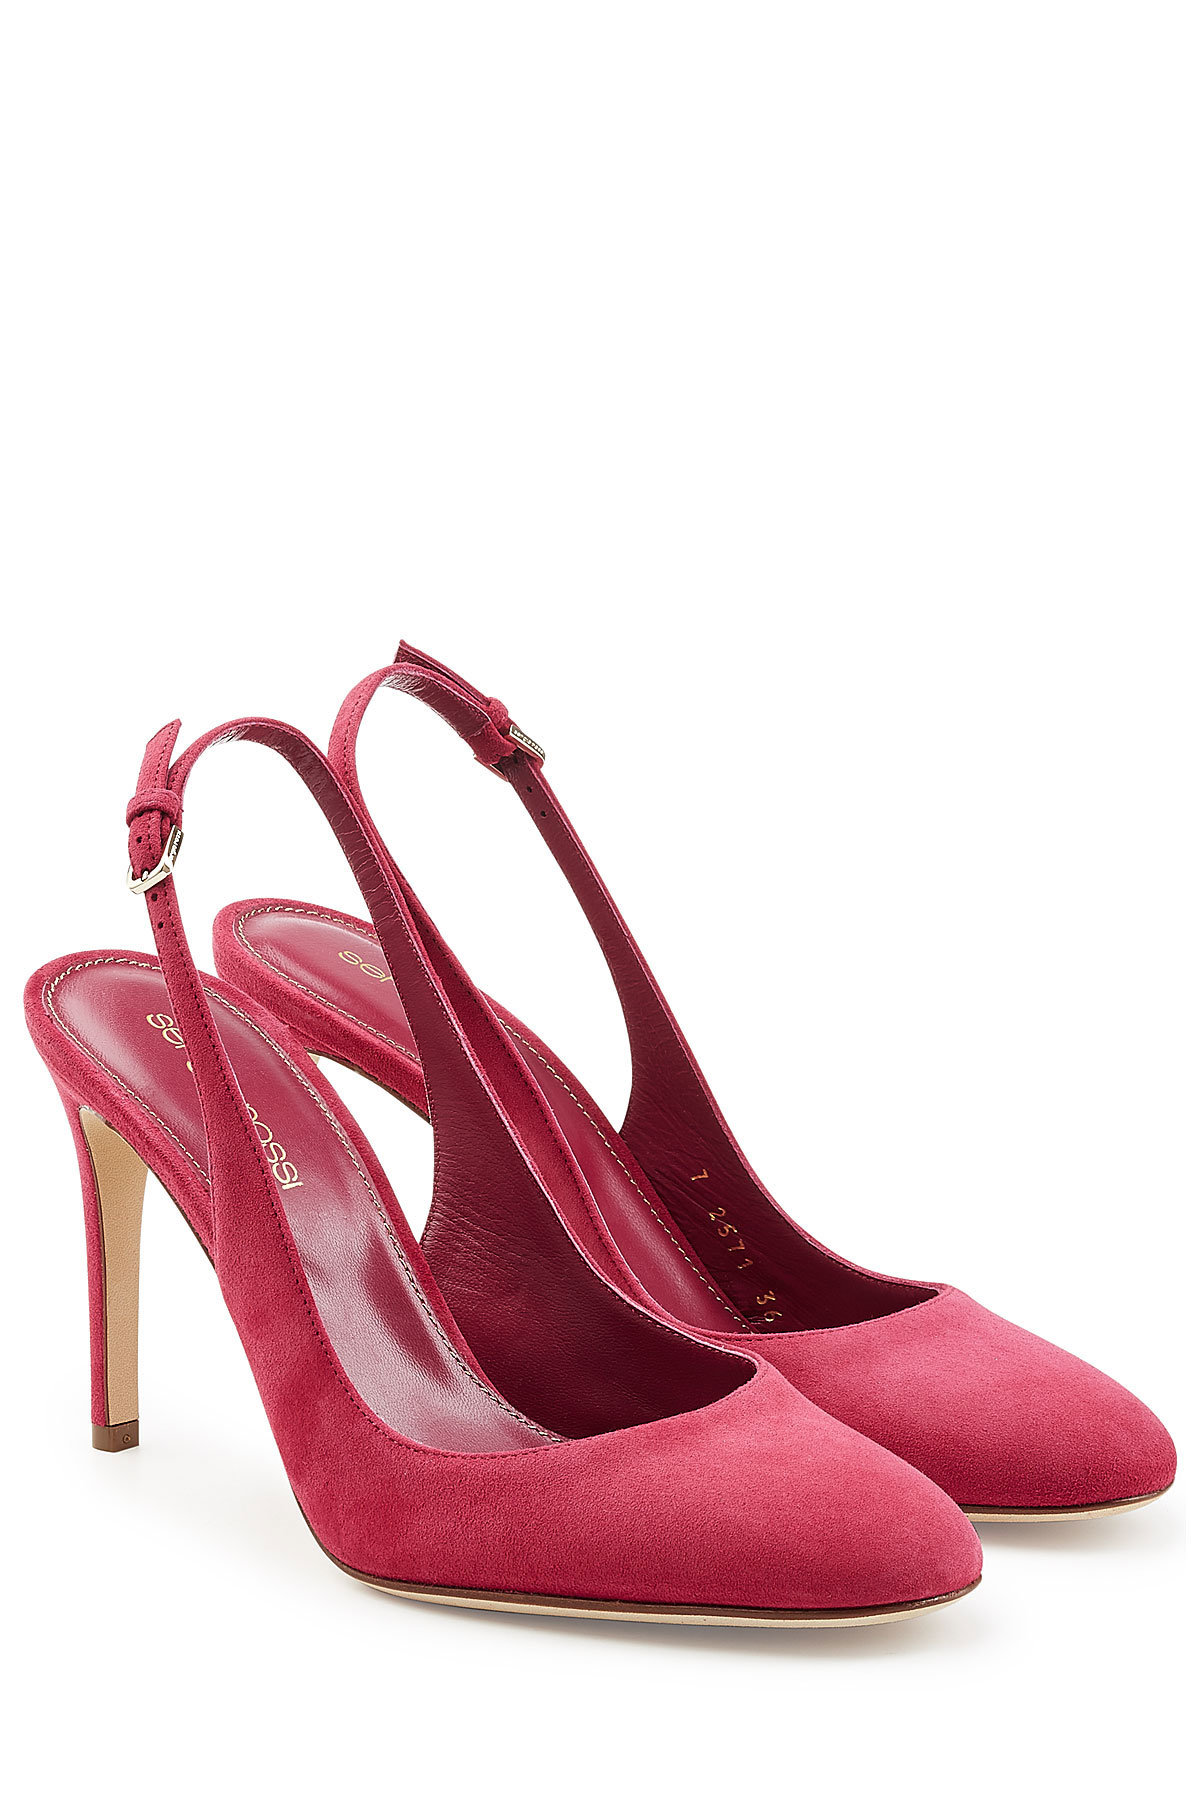 Sergio Rossi - Suede Sling-Back Pumps